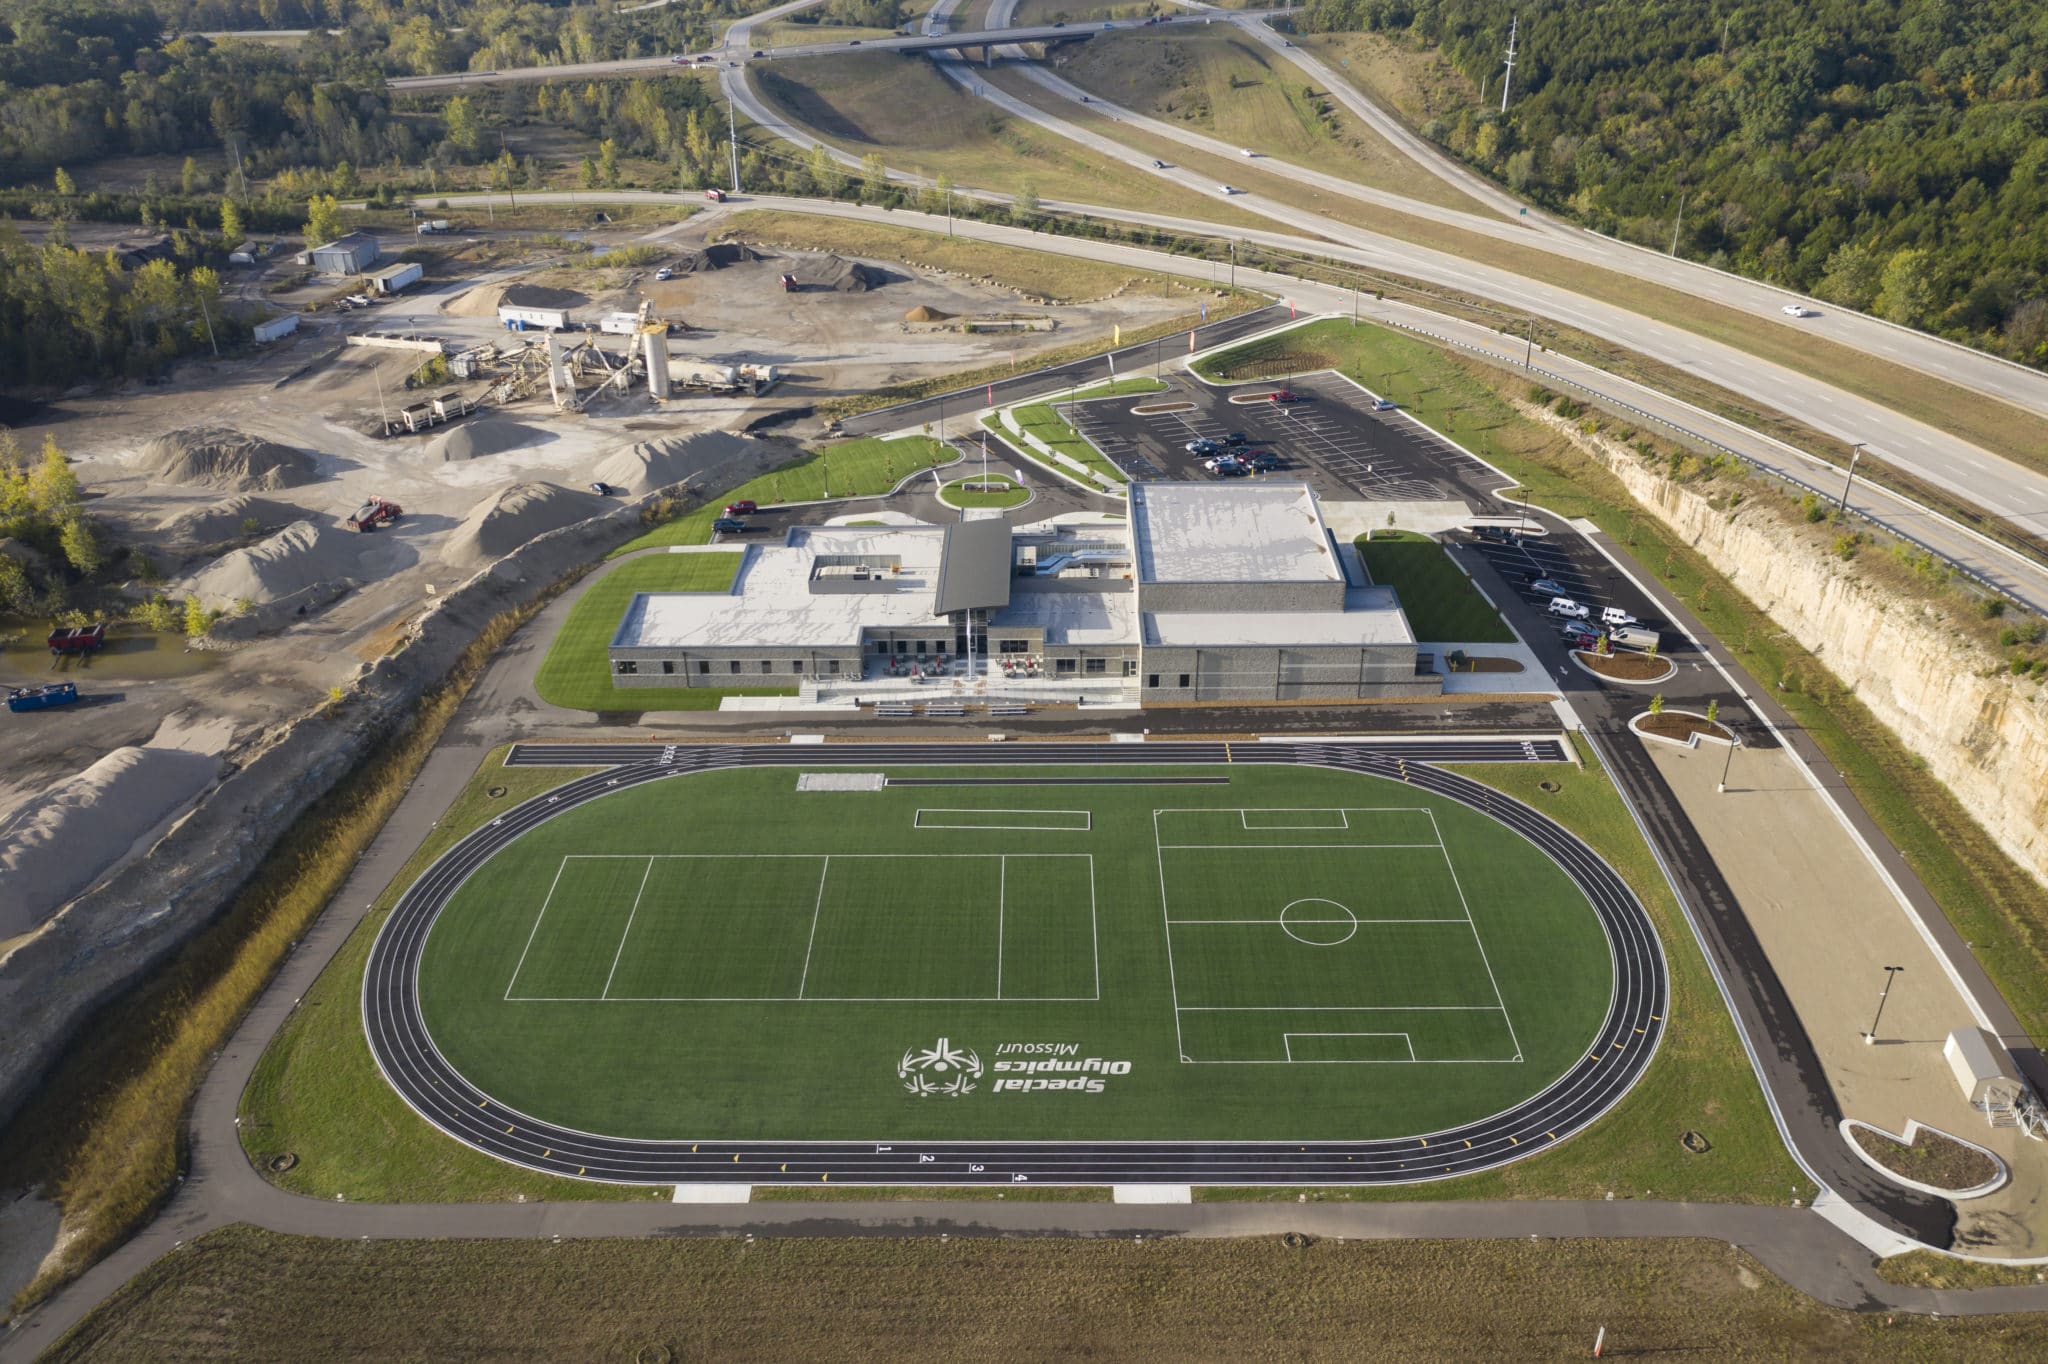 An aerial photo of the Training for Life Campus showing the turf field, track, and building